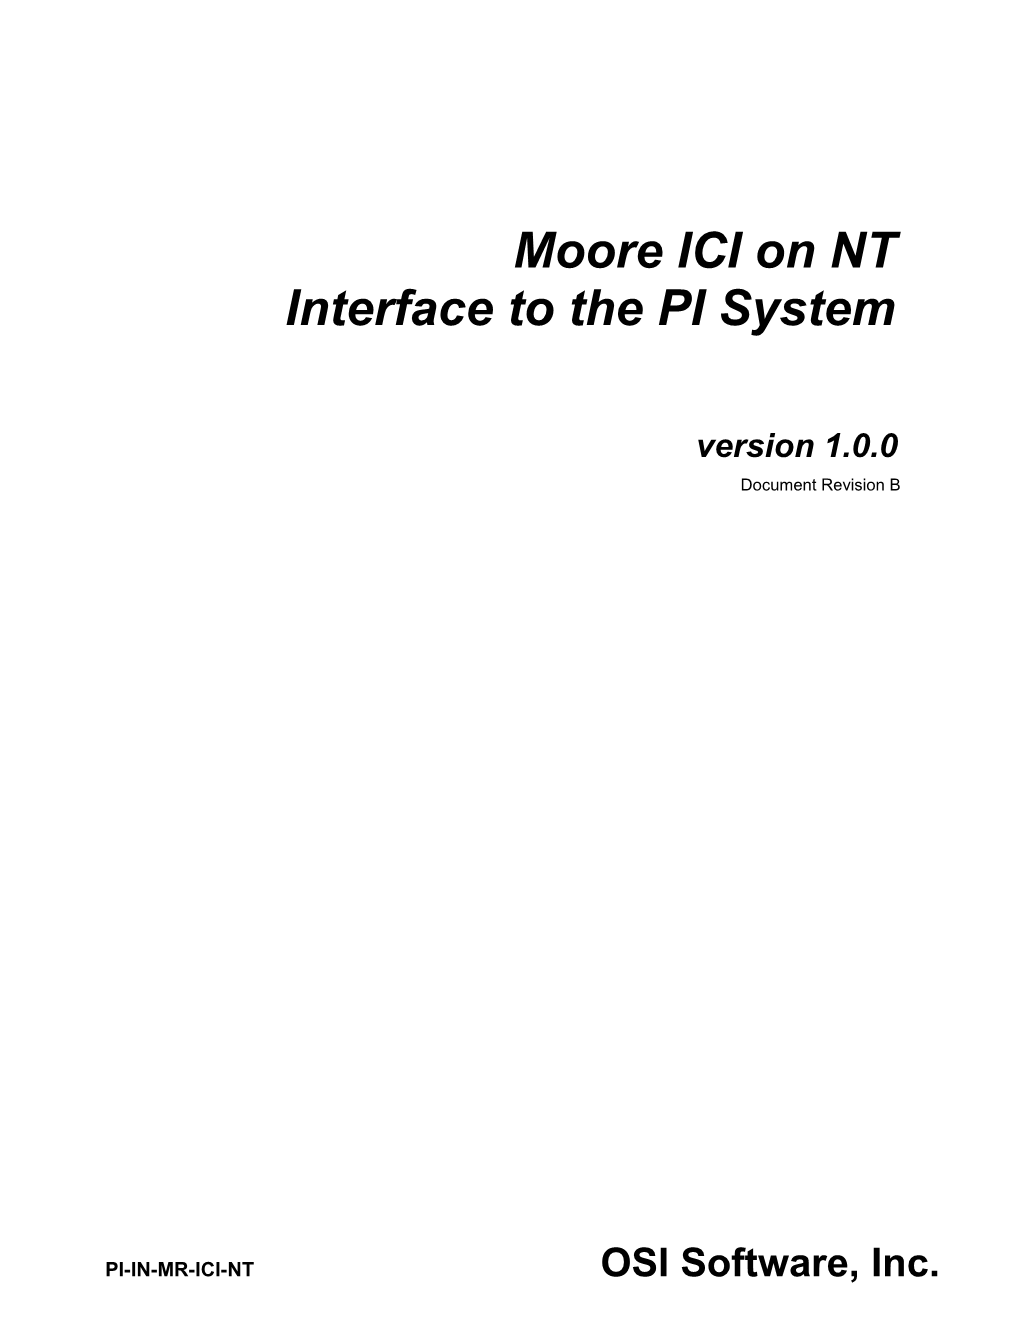 Moore ICI on NT Interface to the PI System